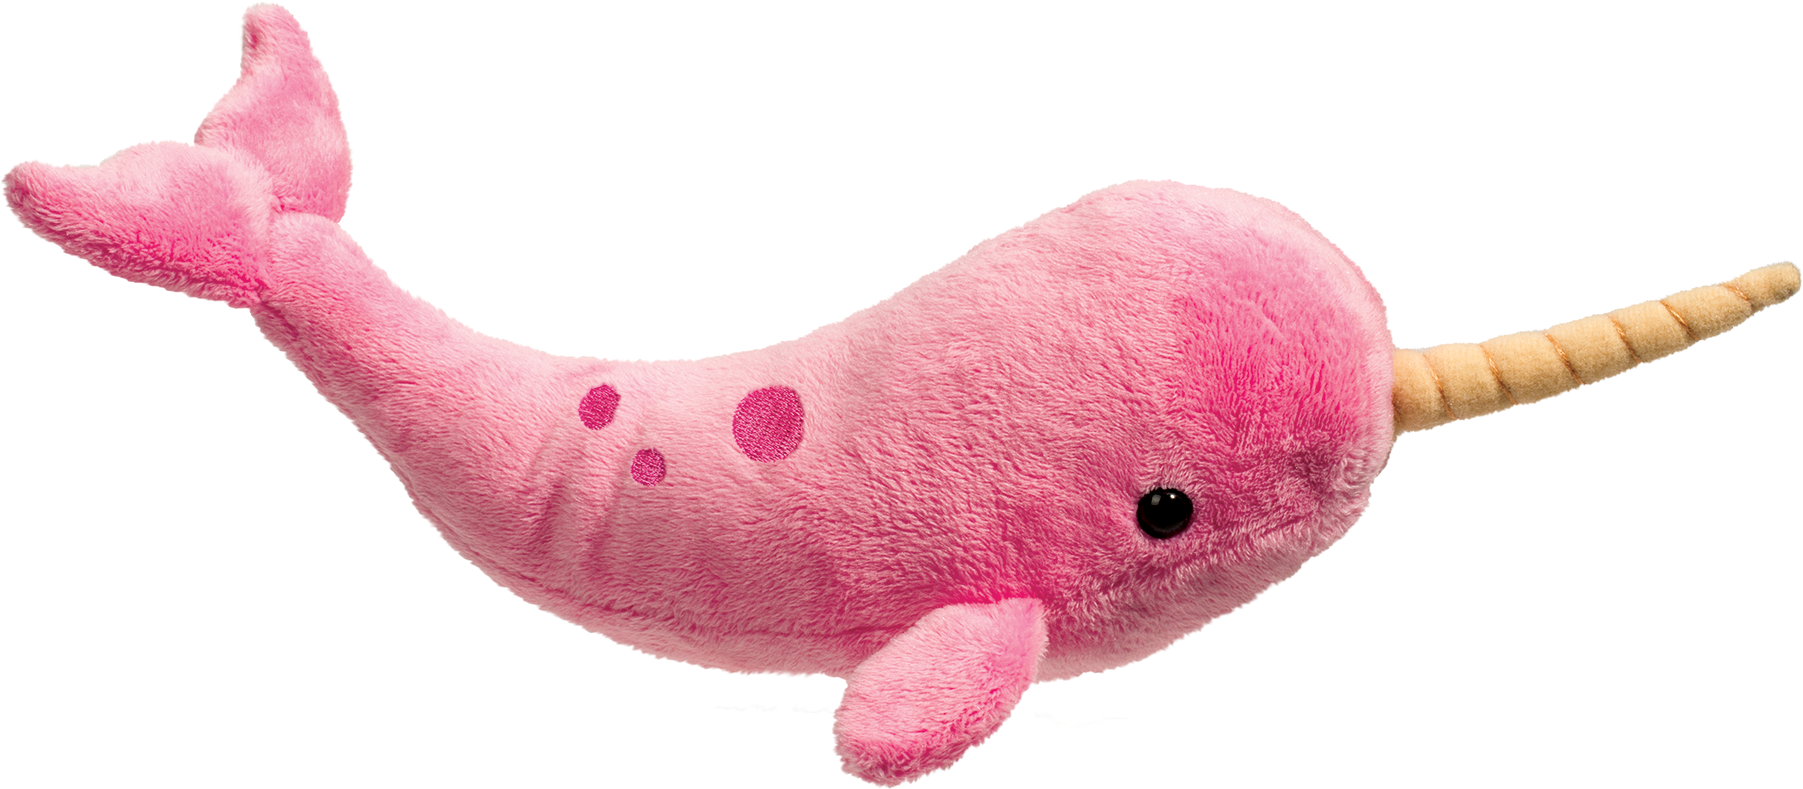 A Pink Stuffed Animal With Black Background